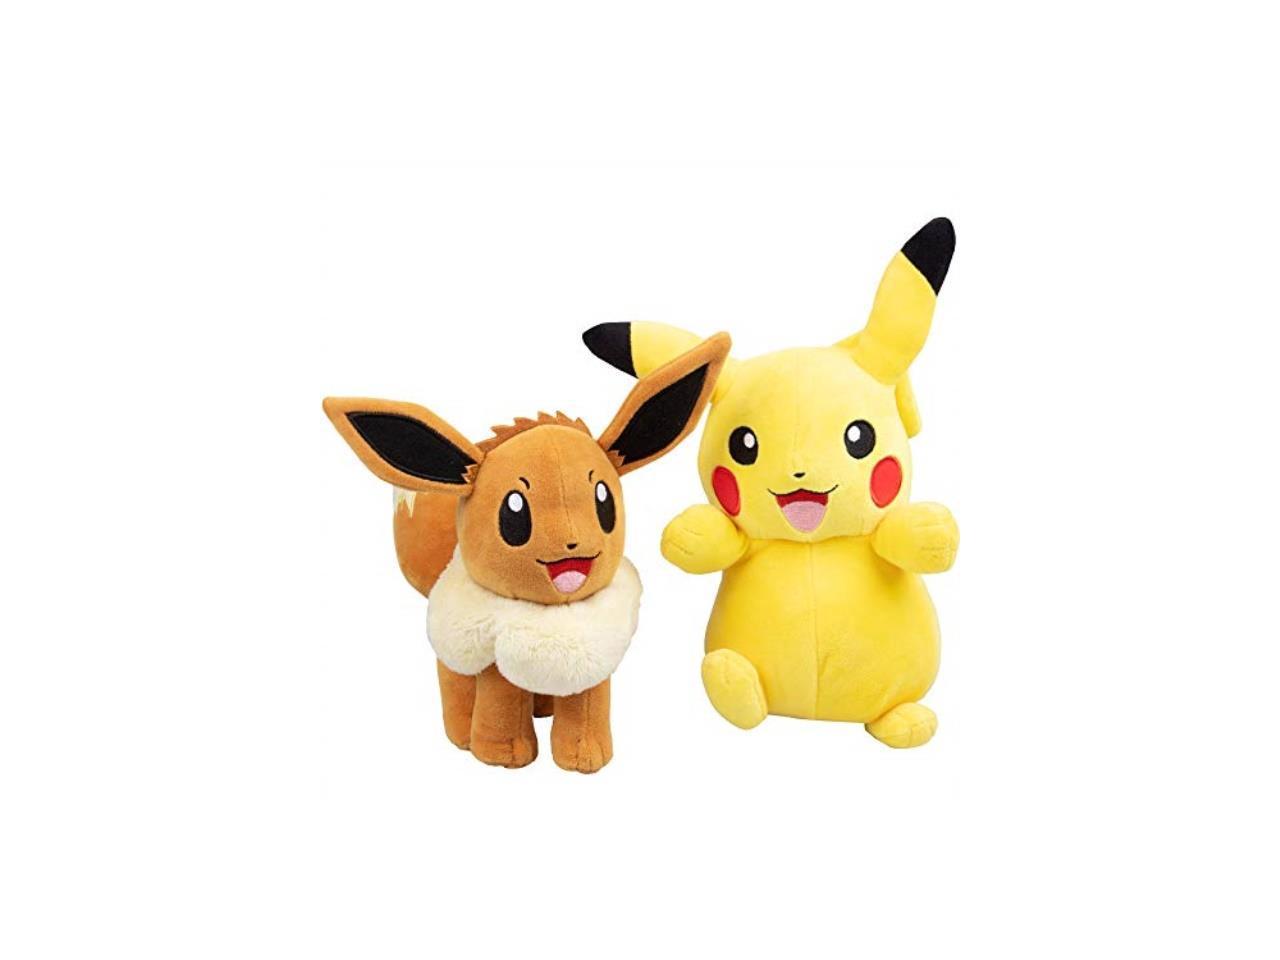 8.5" inches Soft Plush Pokemon Pikachu & Friends 4" Choose Your Character 